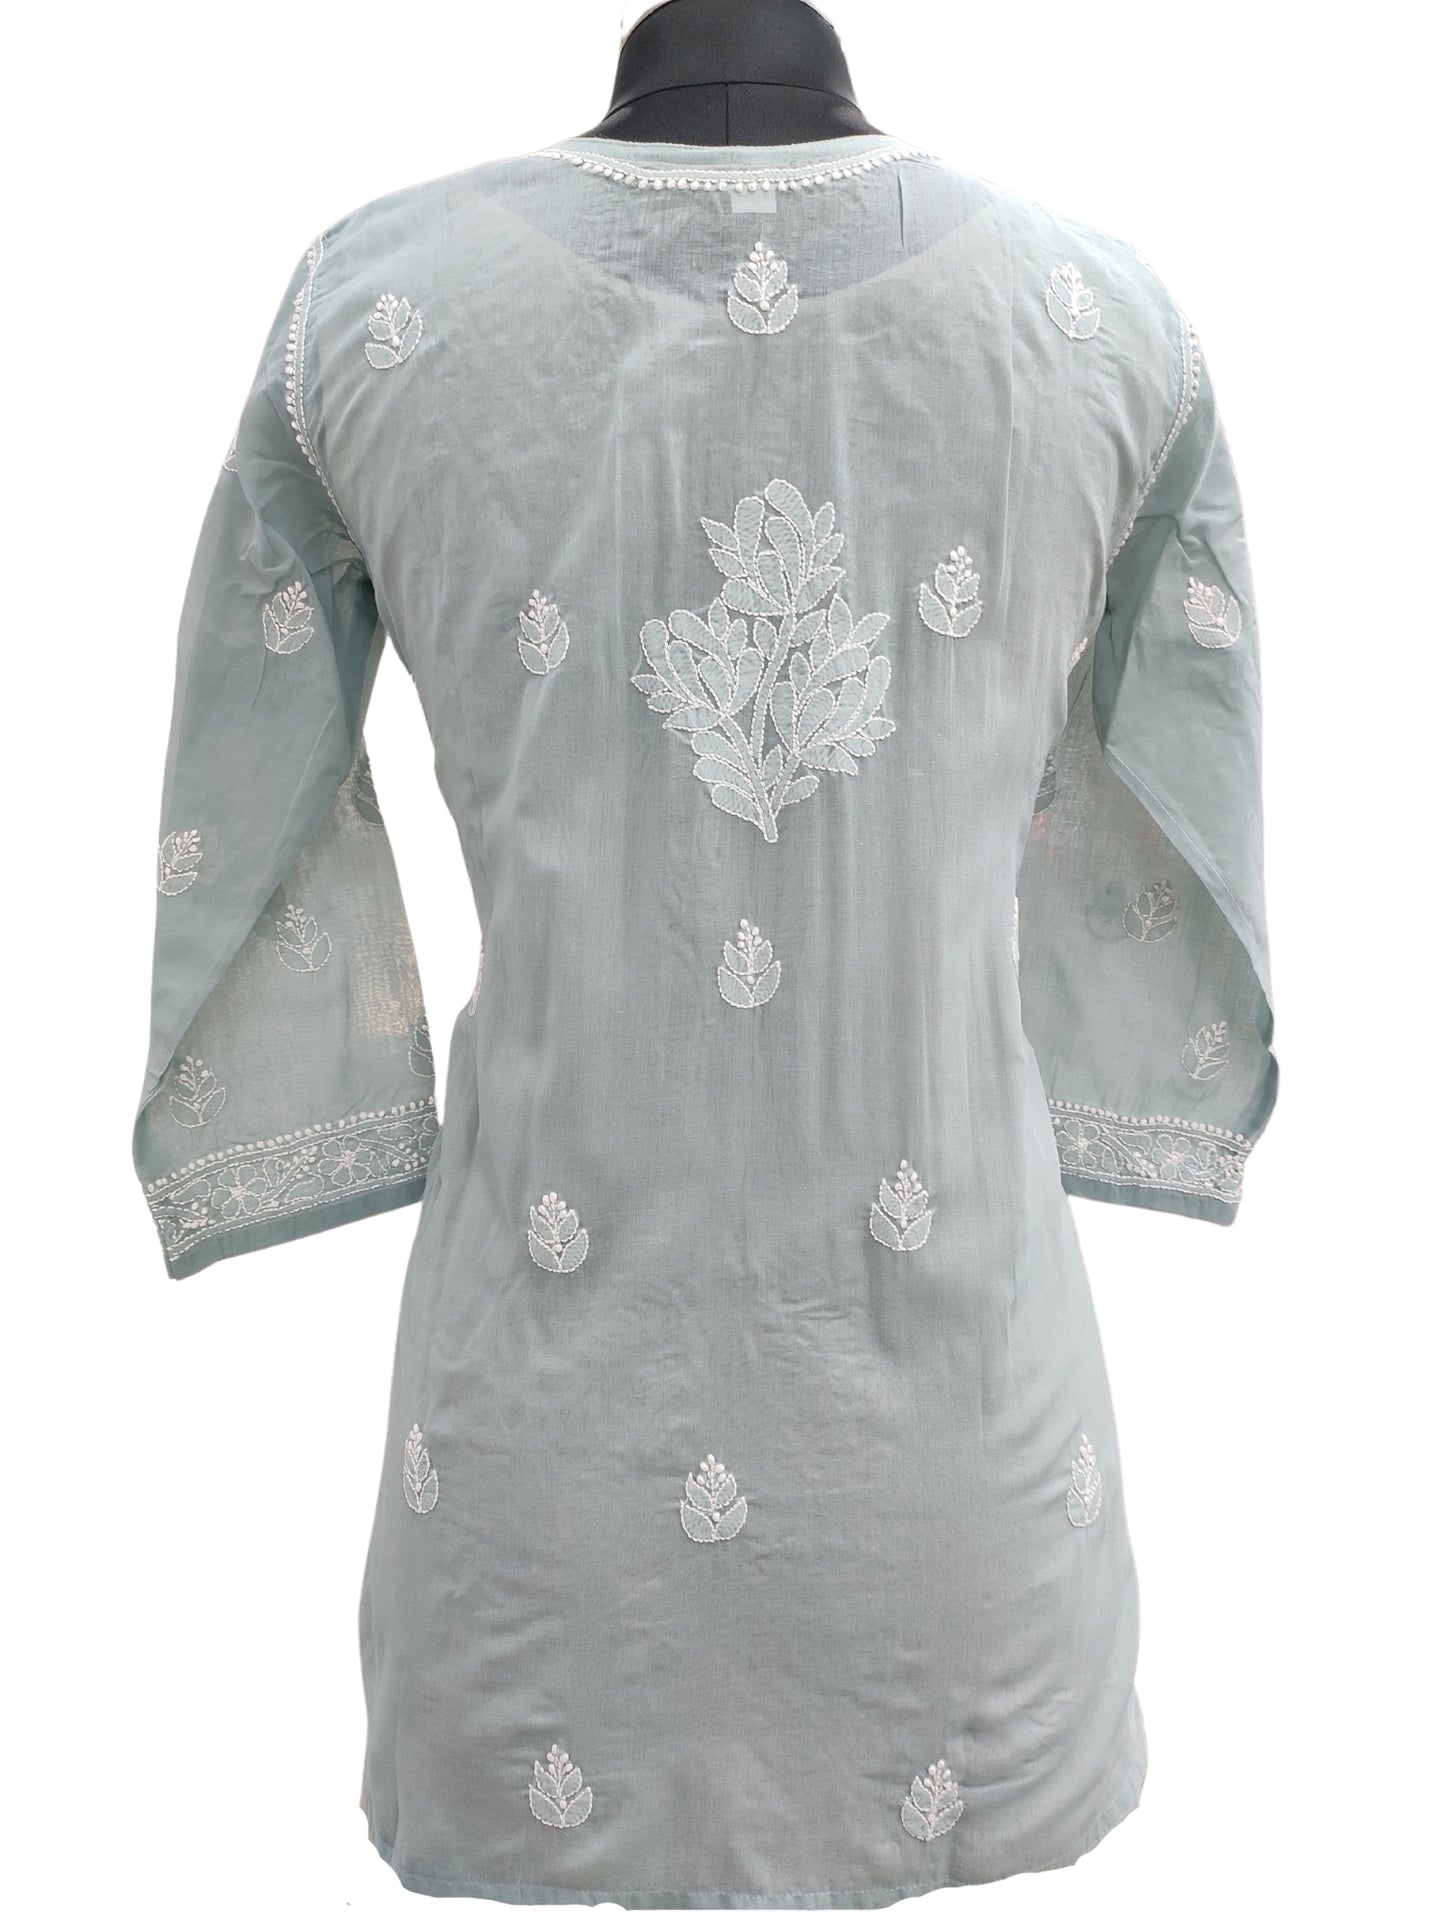 Shyamal Chikan Hand Embroidered Grey Cotton Lucknowi Chikankari Short Top With Jaali Work- S21764